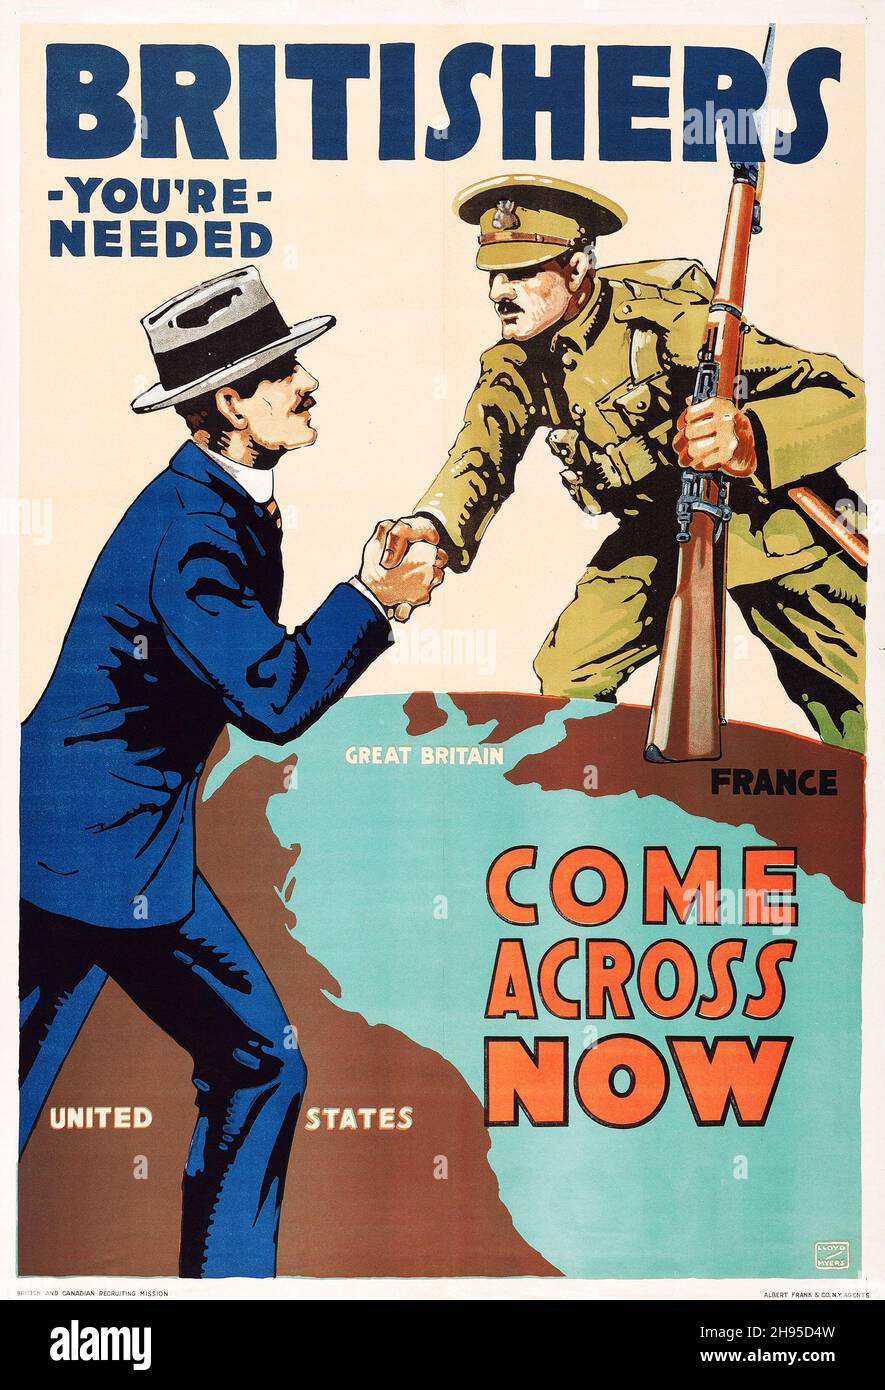 World War I Propaganda (British and Canadian Recruiting Mission, 1916). Poster 'Britishers You're Needed'. Stock Photo